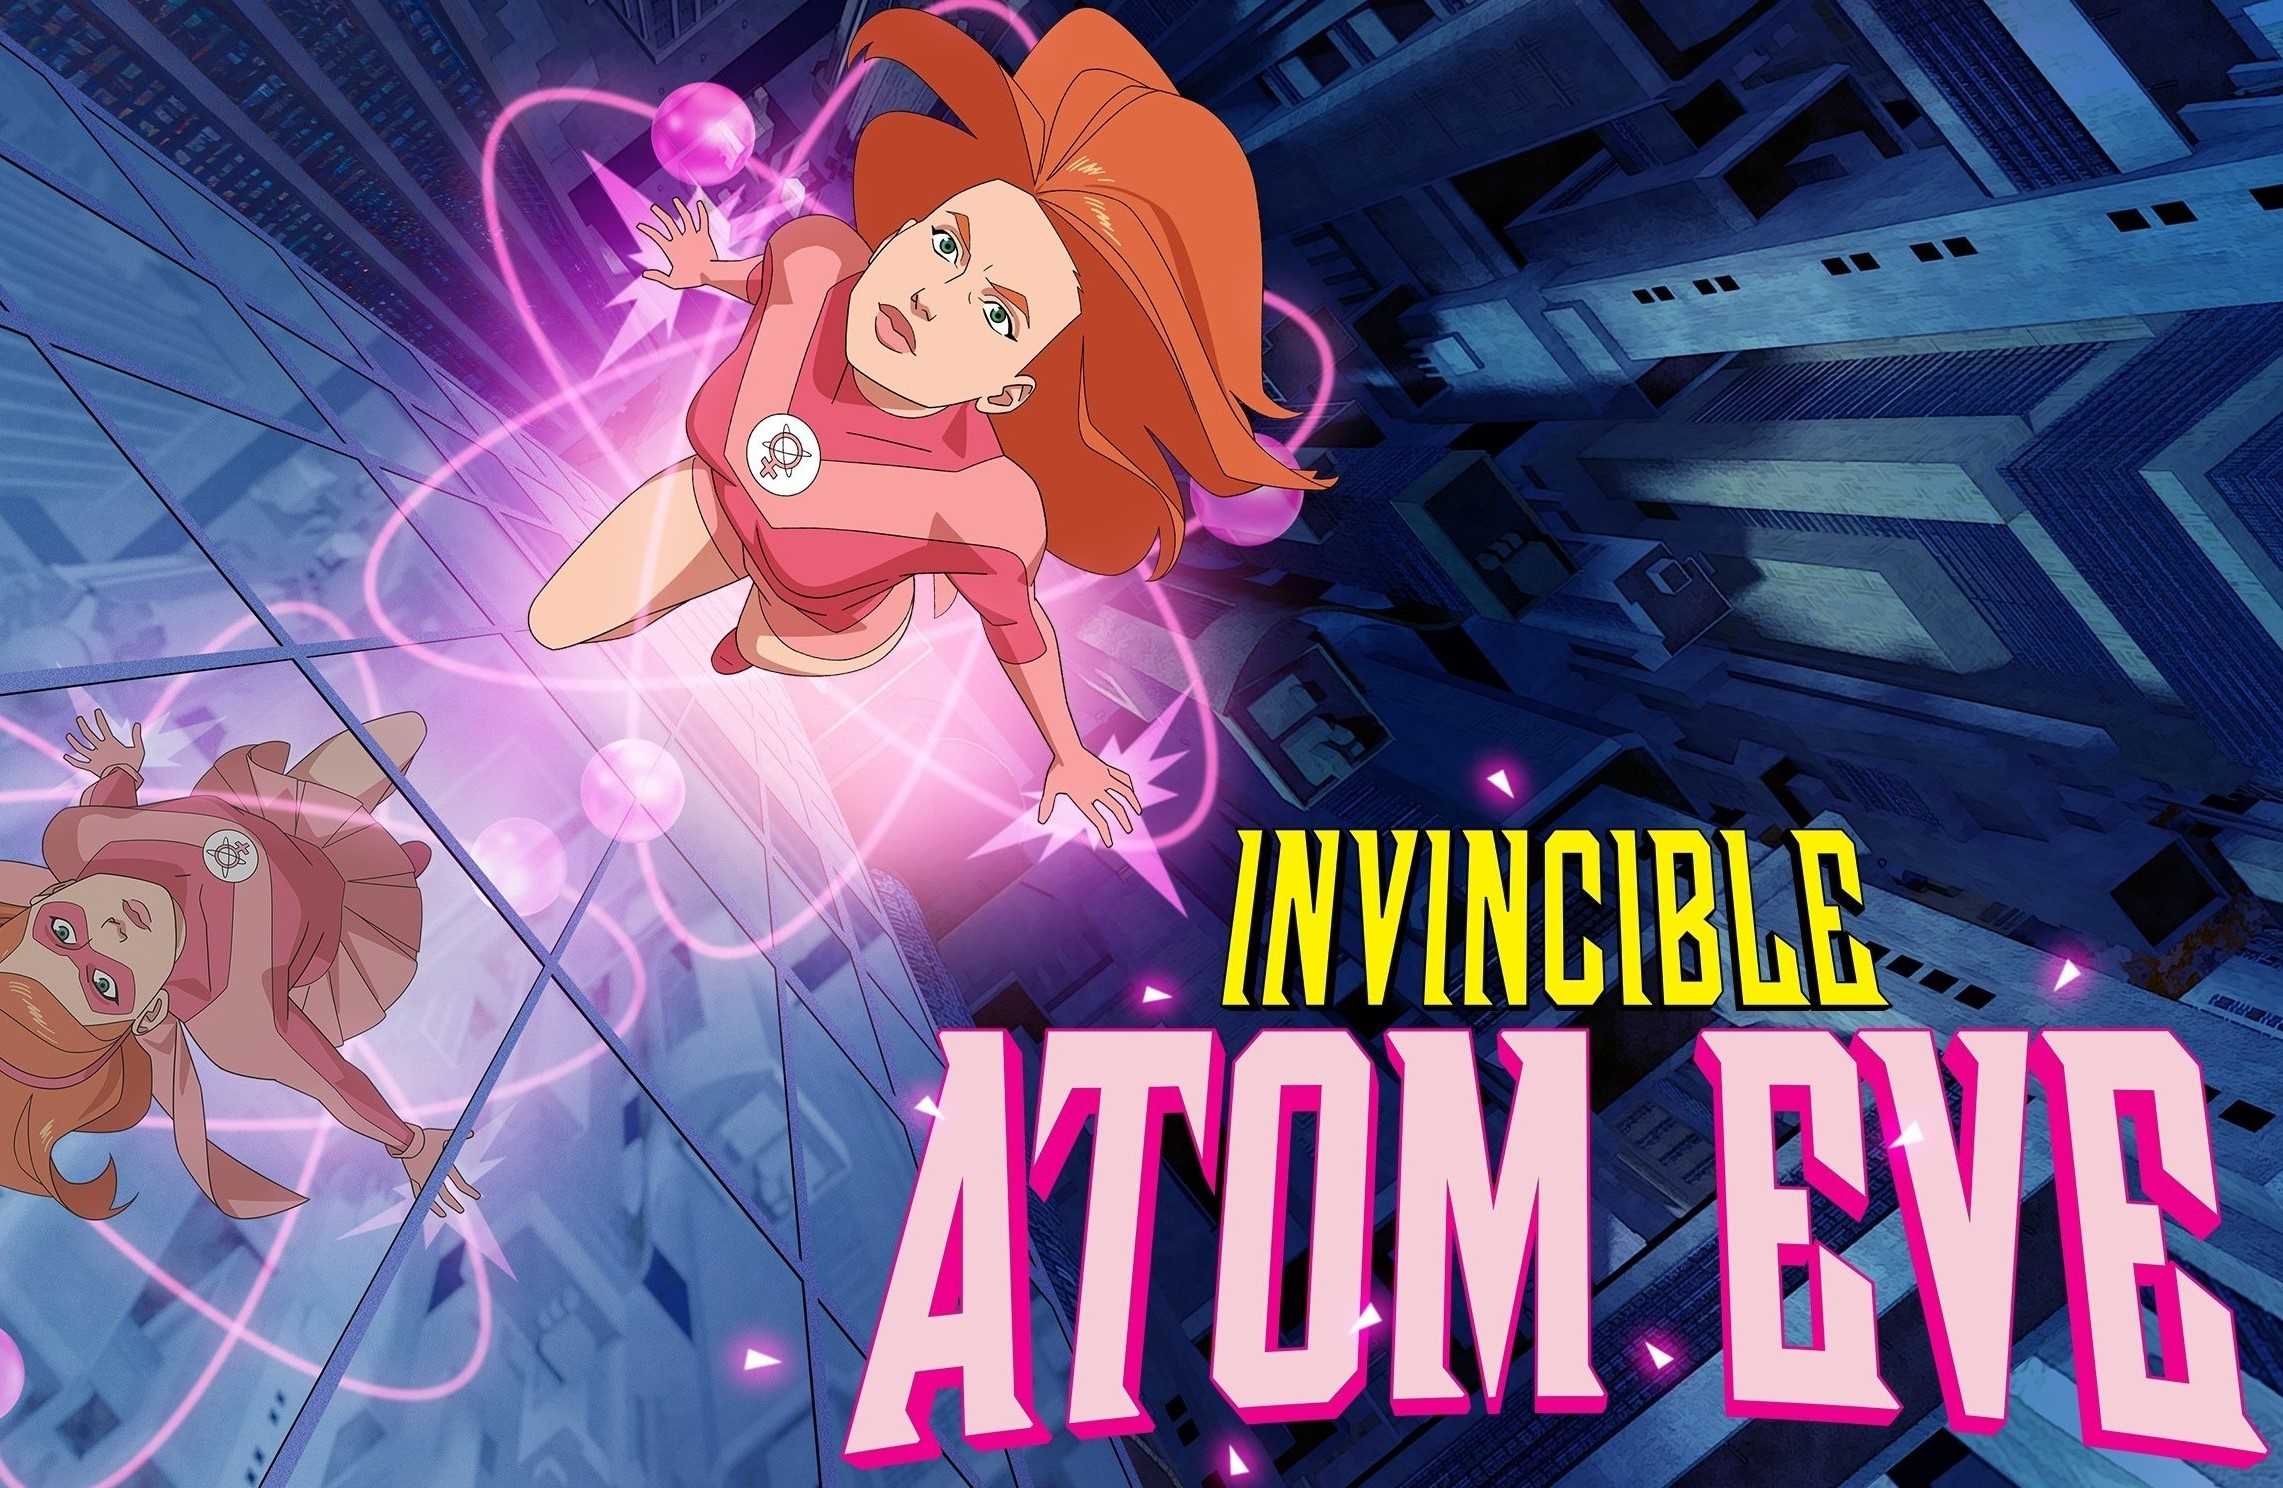 12-facts-about-atom-eve-invincible